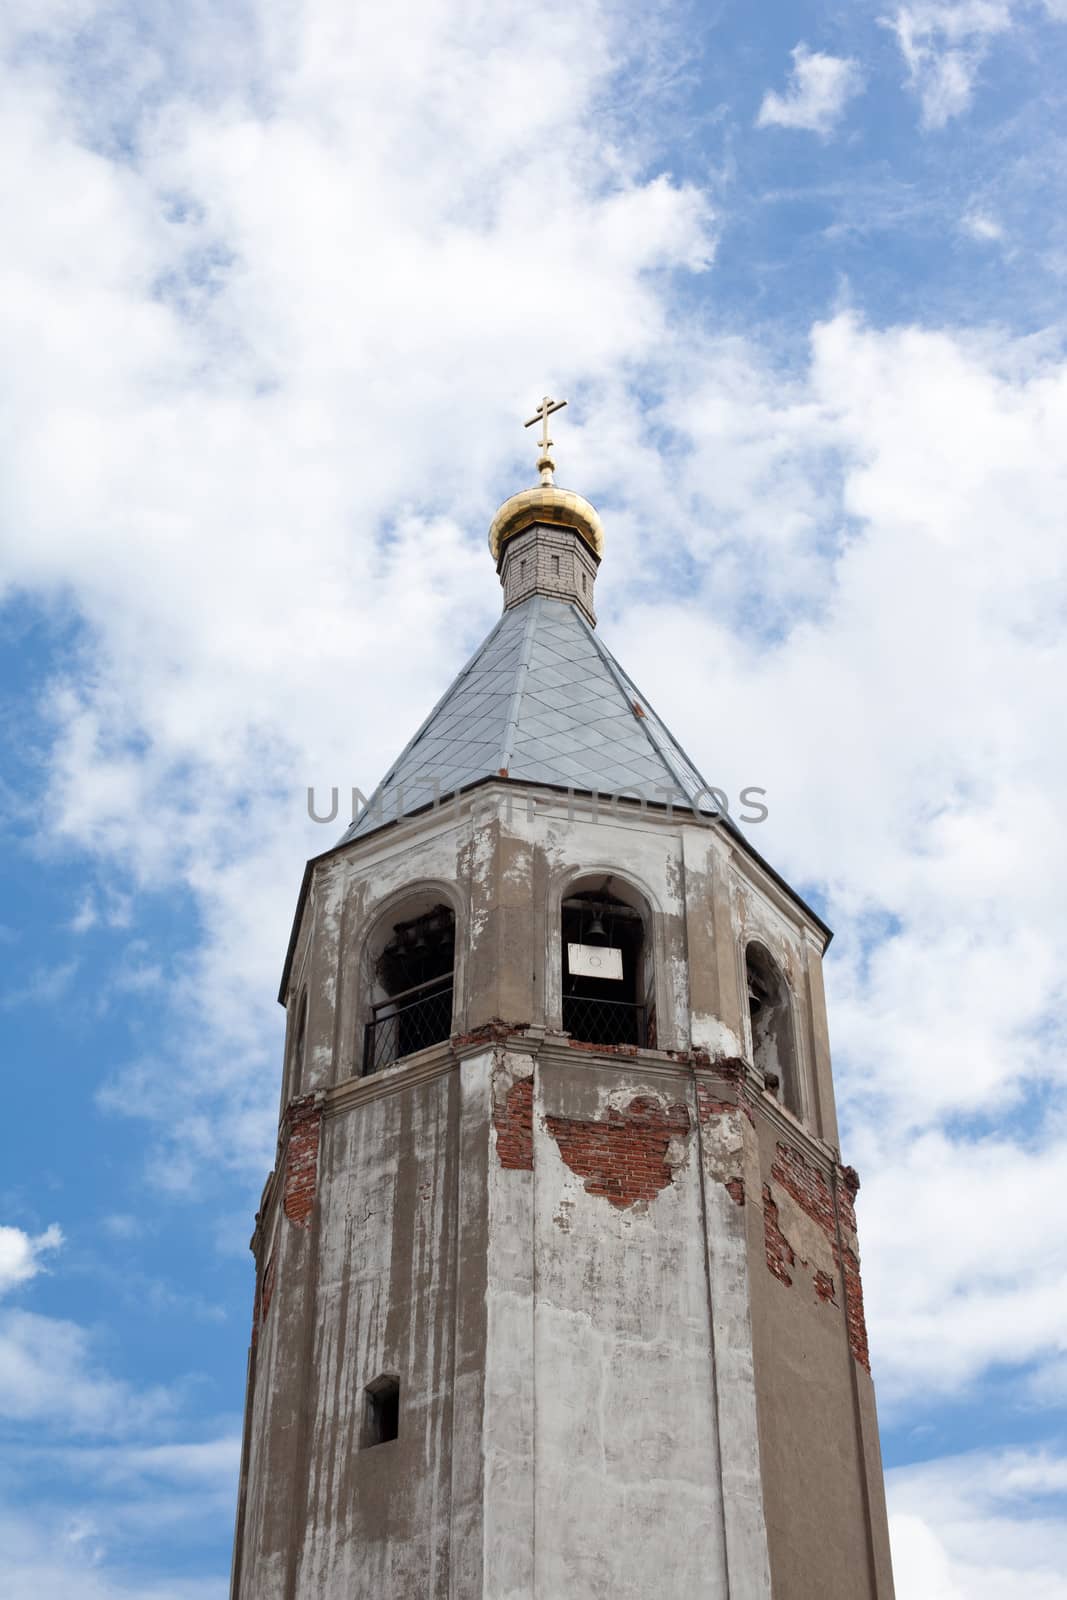 Brick red orthodox church with one golden dome
